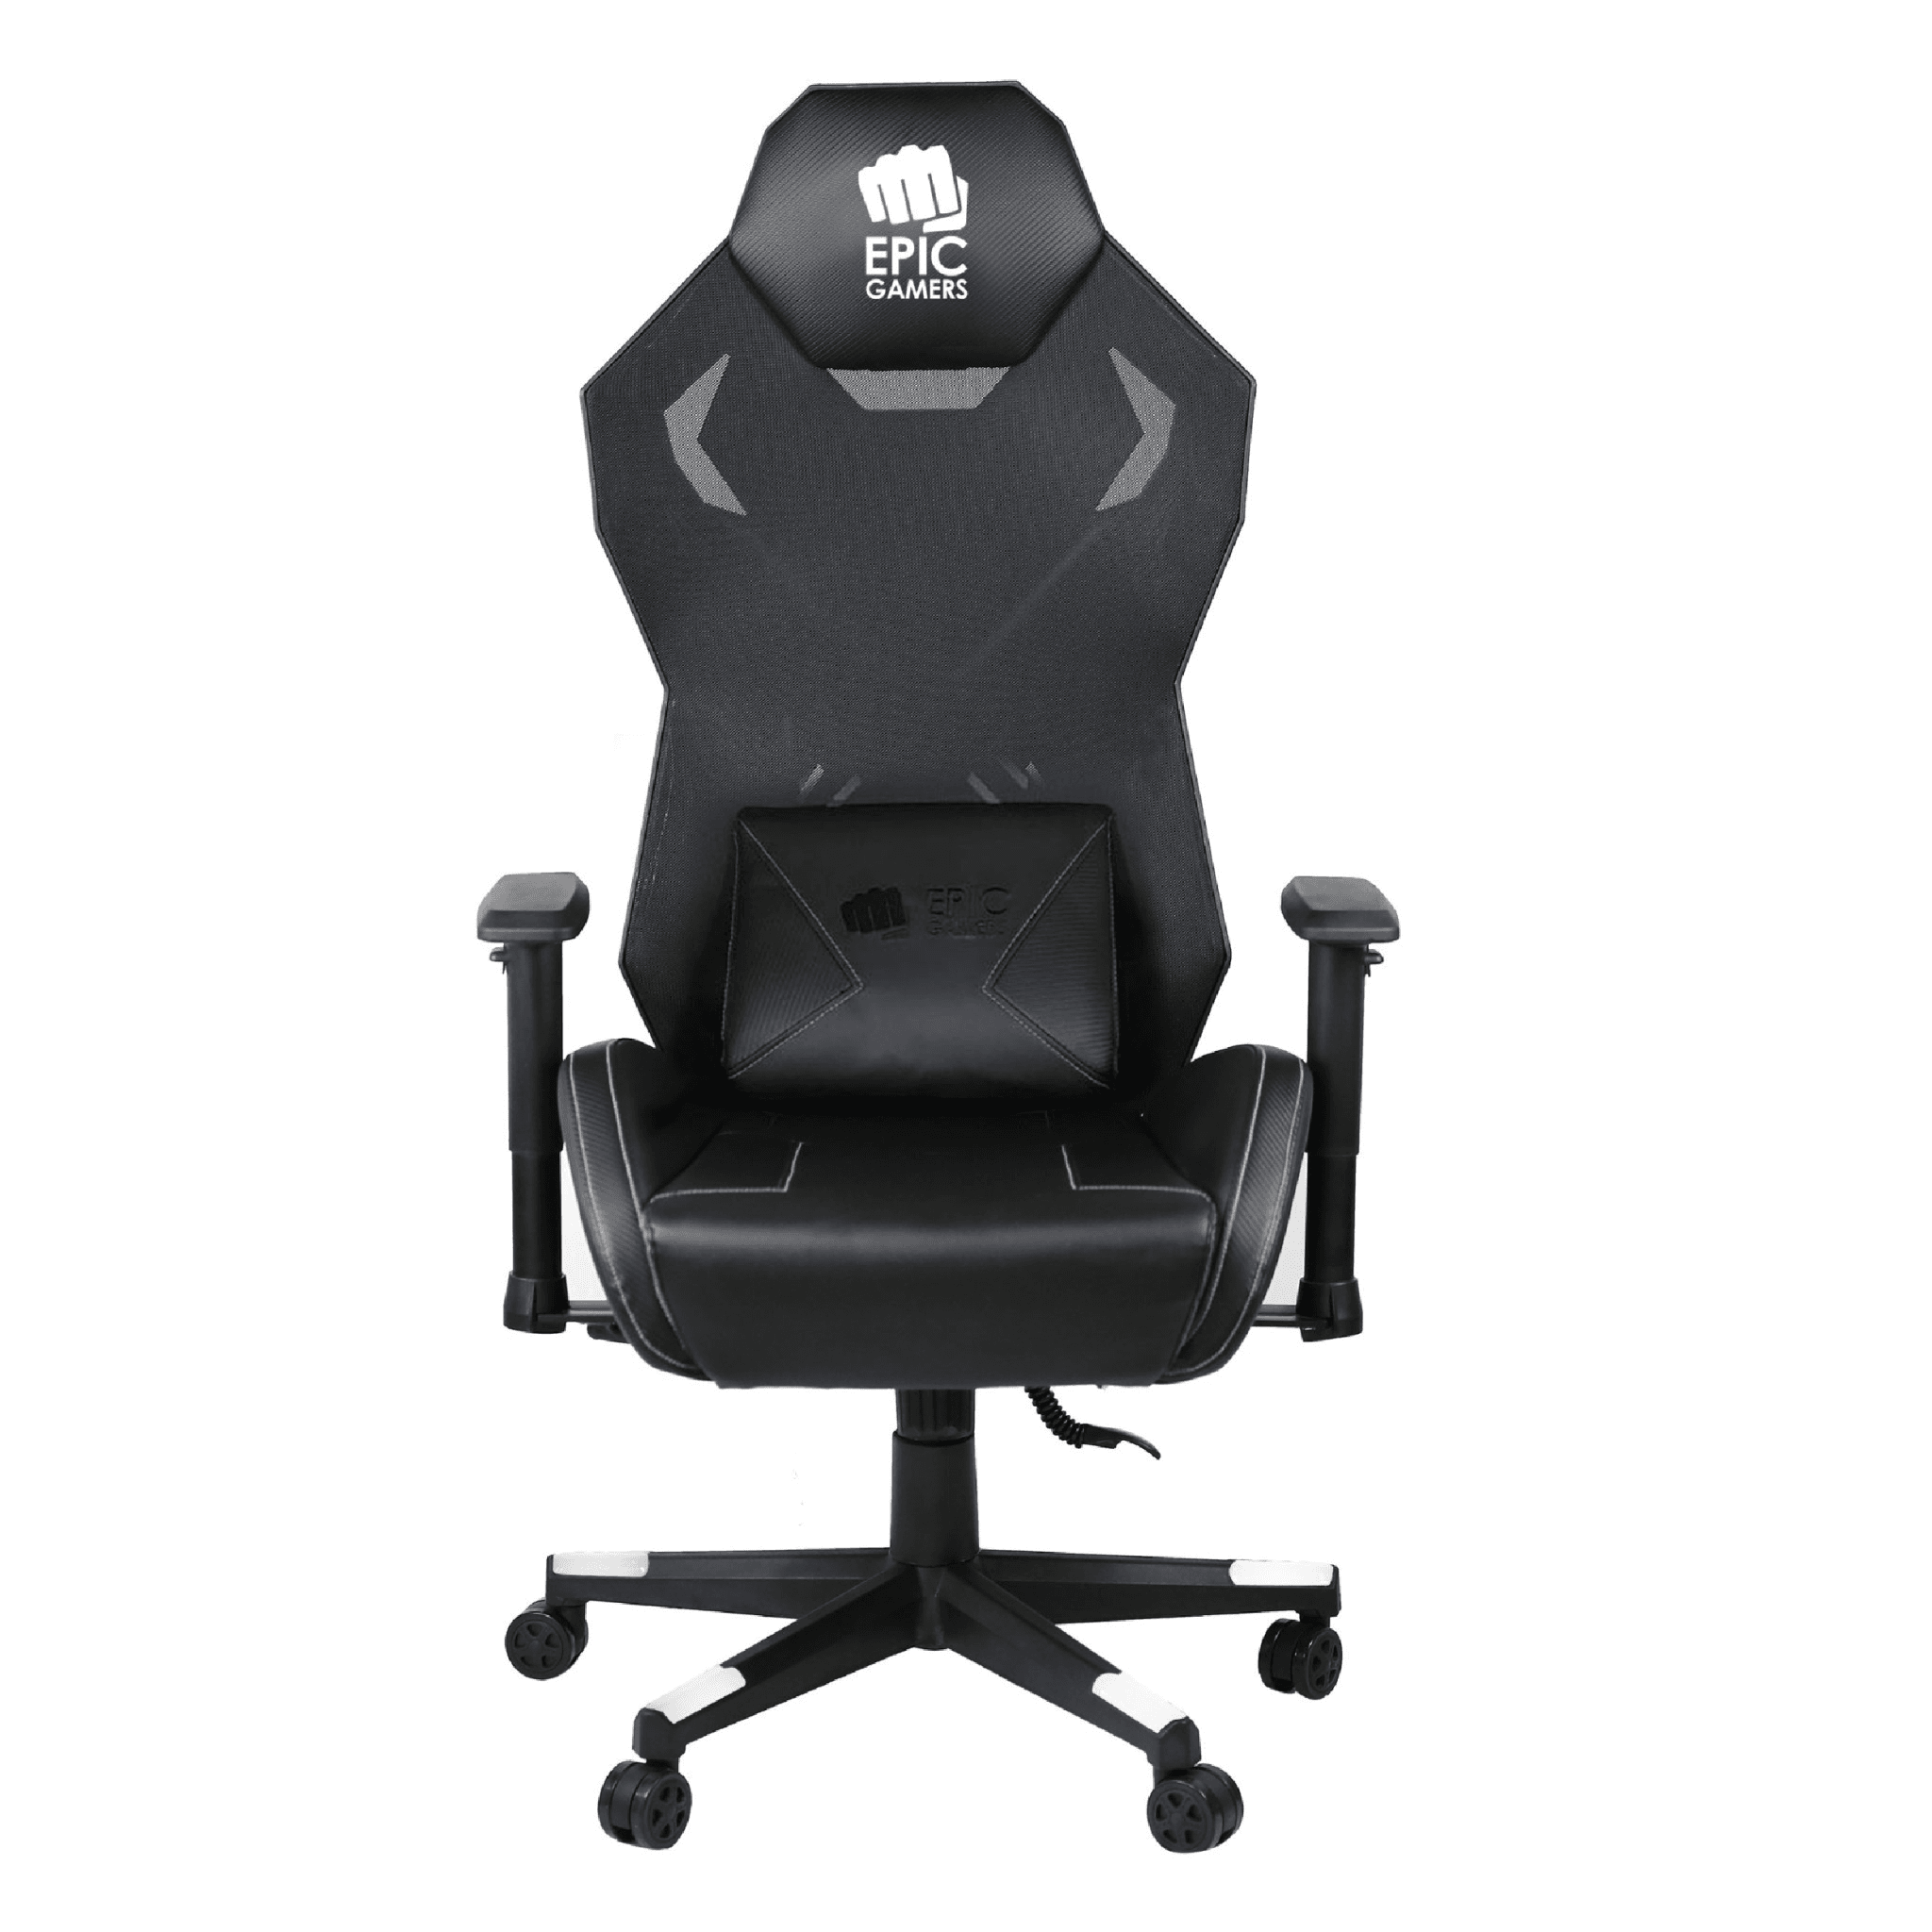 Epic Gamers Gaming Chair Model 2 - Black/White - Store 974 | ستور ٩٧٤